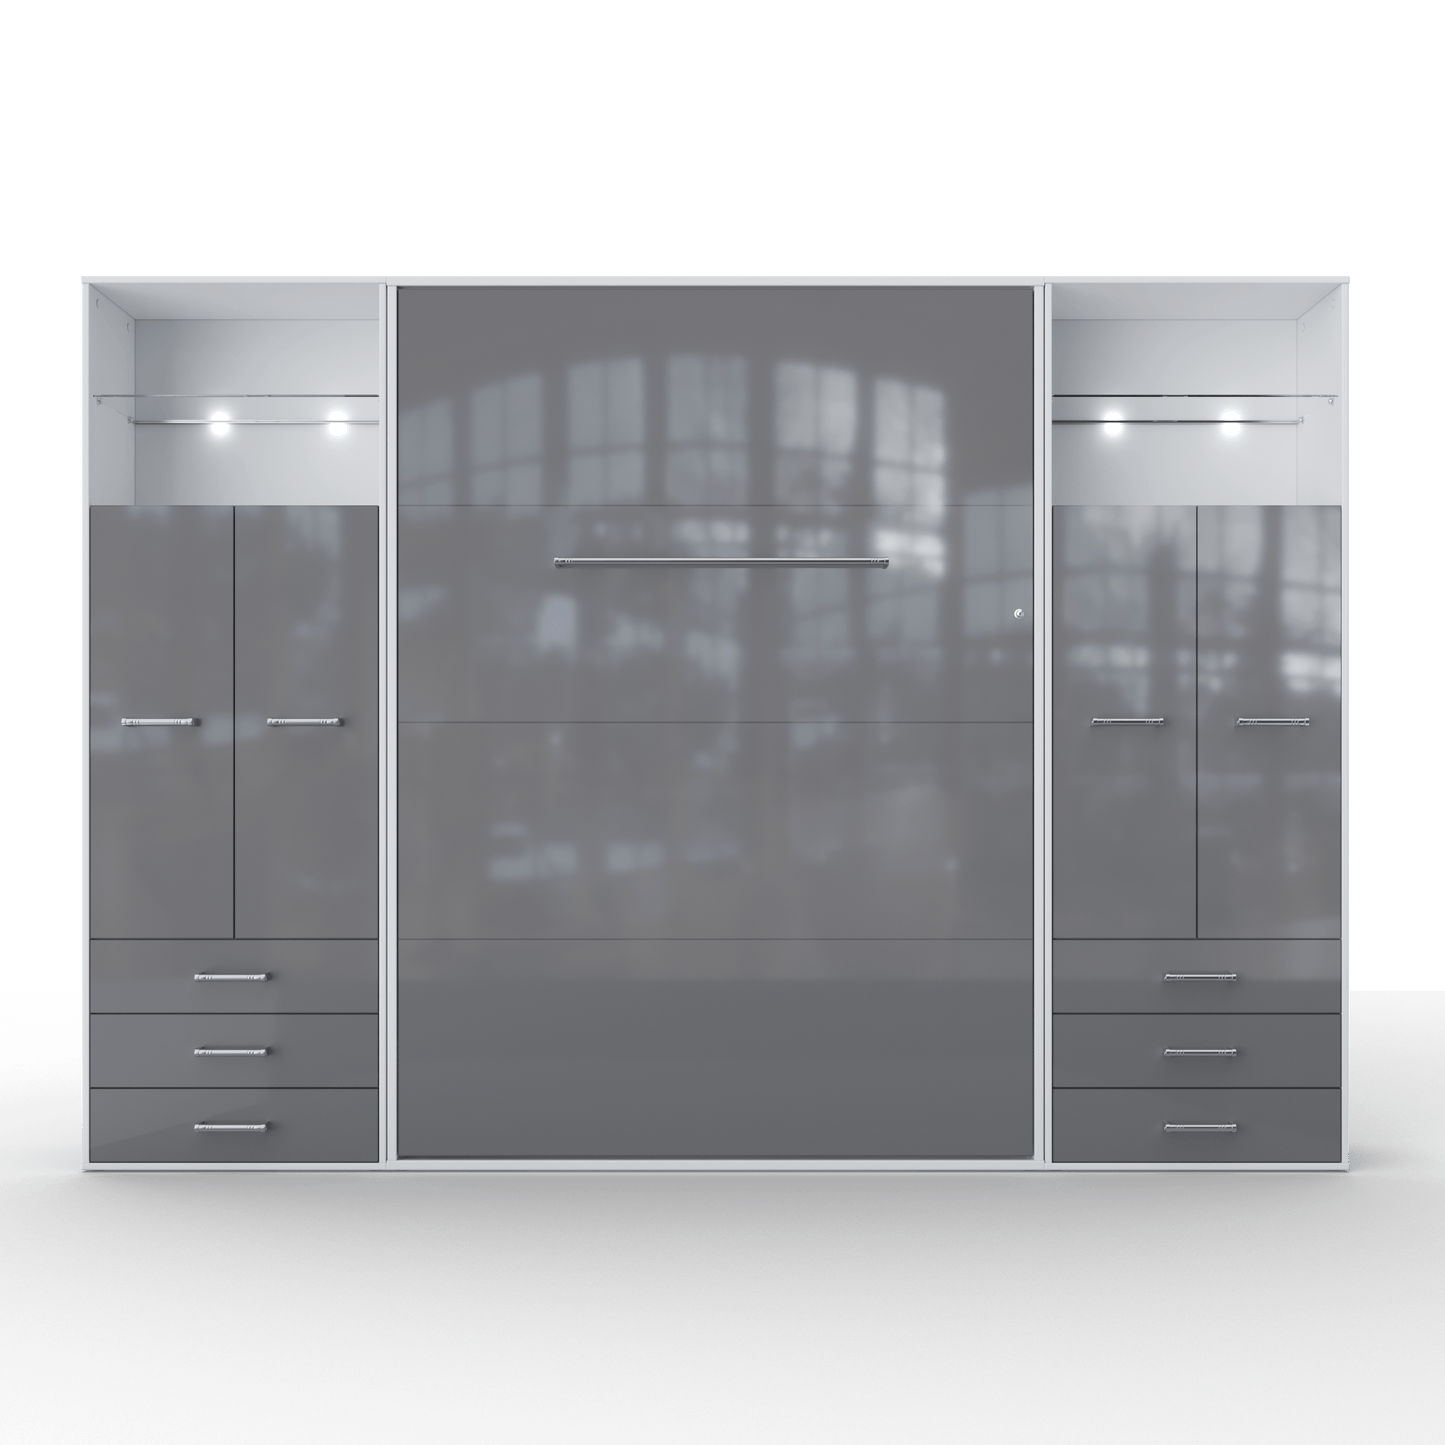 Maxima House Vertical Murphy Bed Invento. European Queen + 2 cabinets White/Grey IN160V-10WG